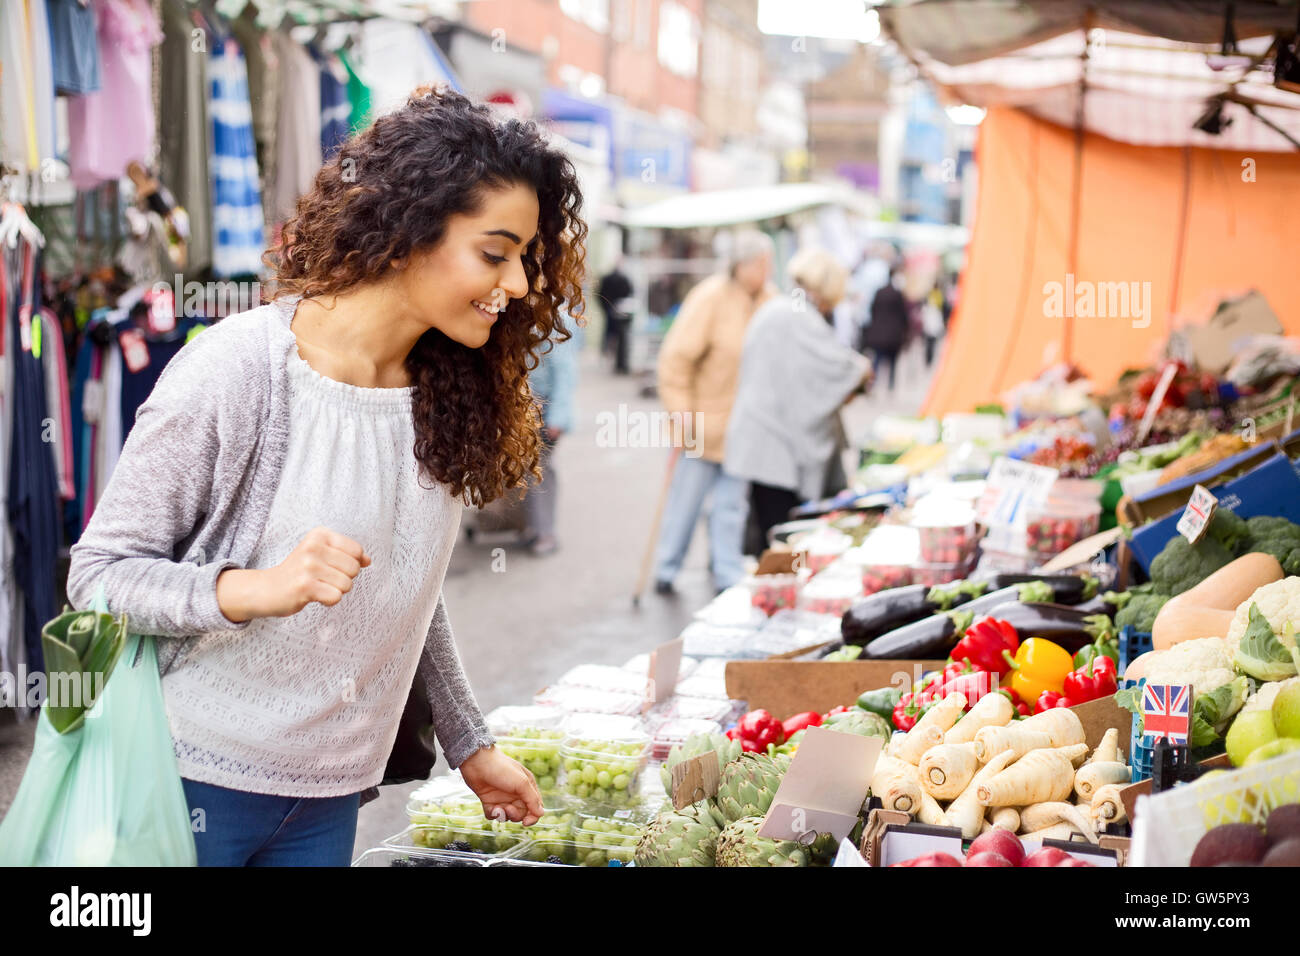 young woman shopping for her fruit and veg Stock Photo